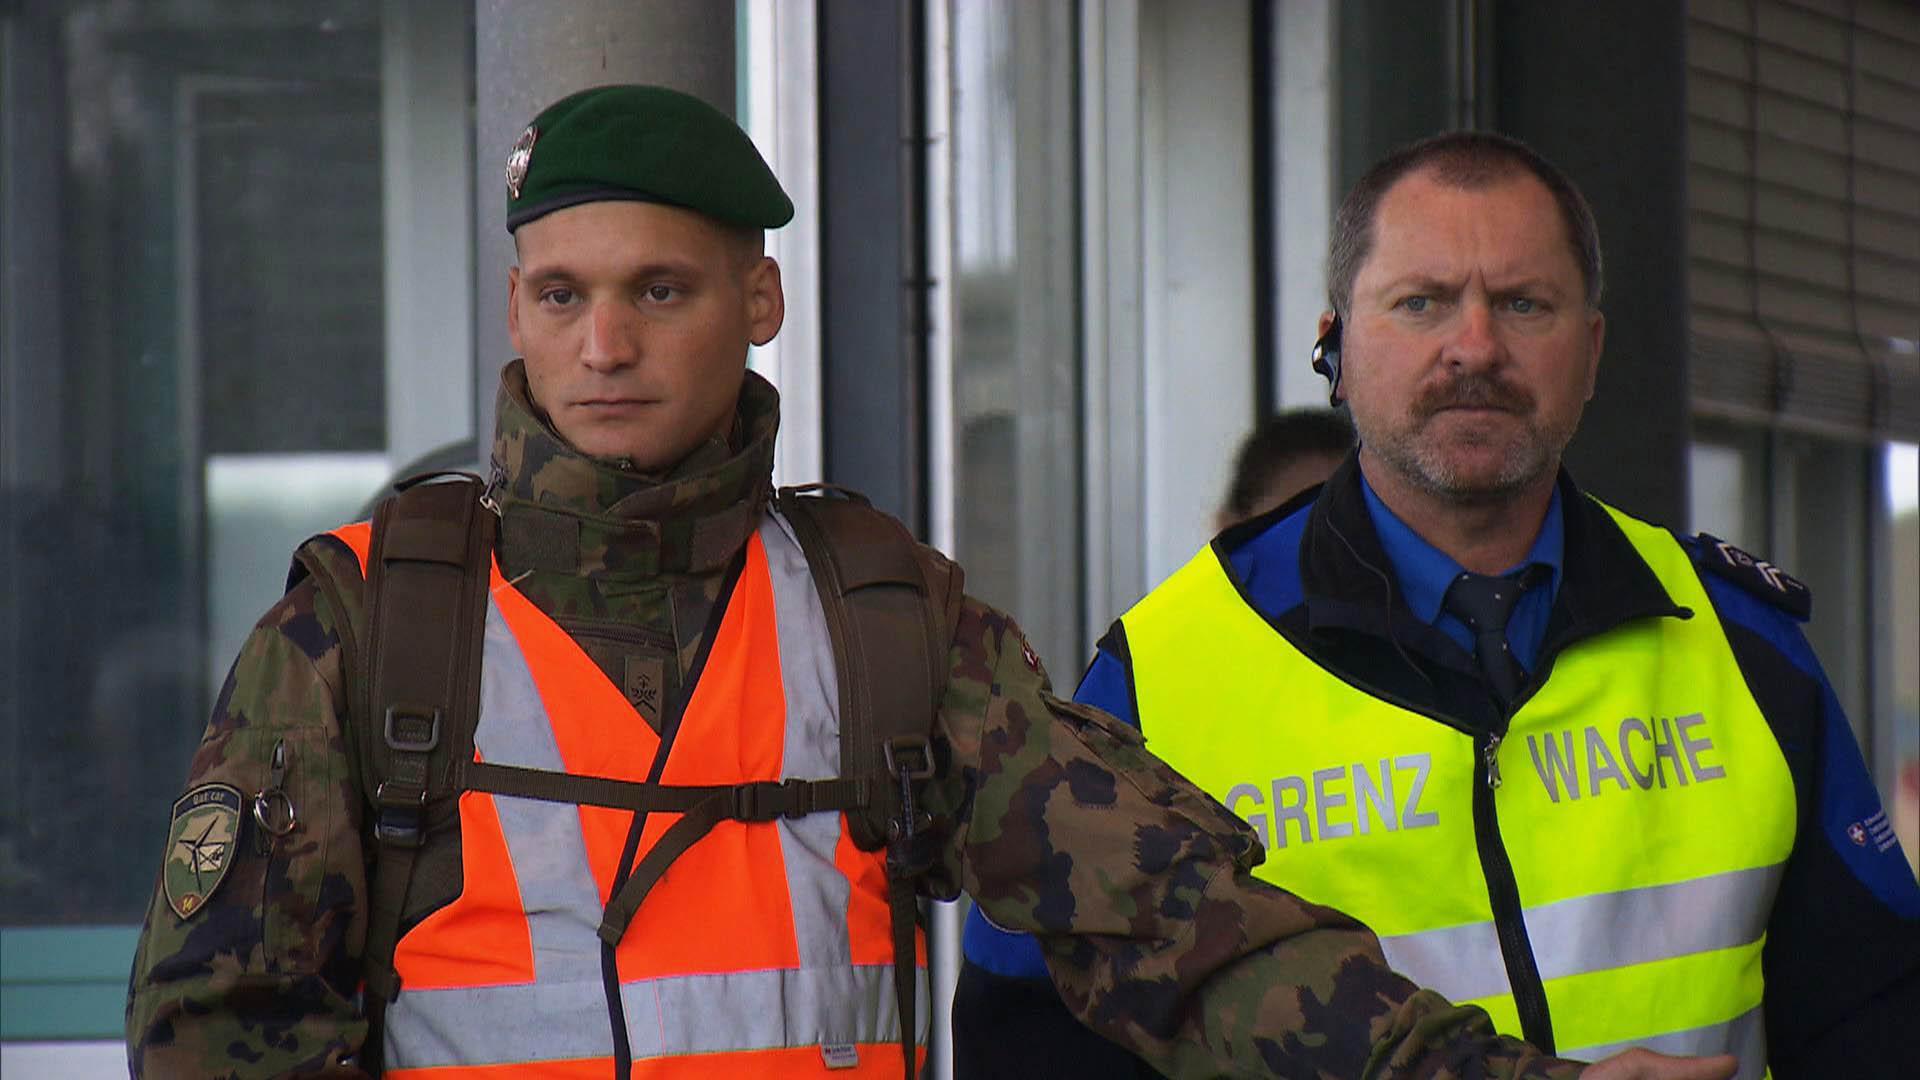 Swiss soldiers as border guards